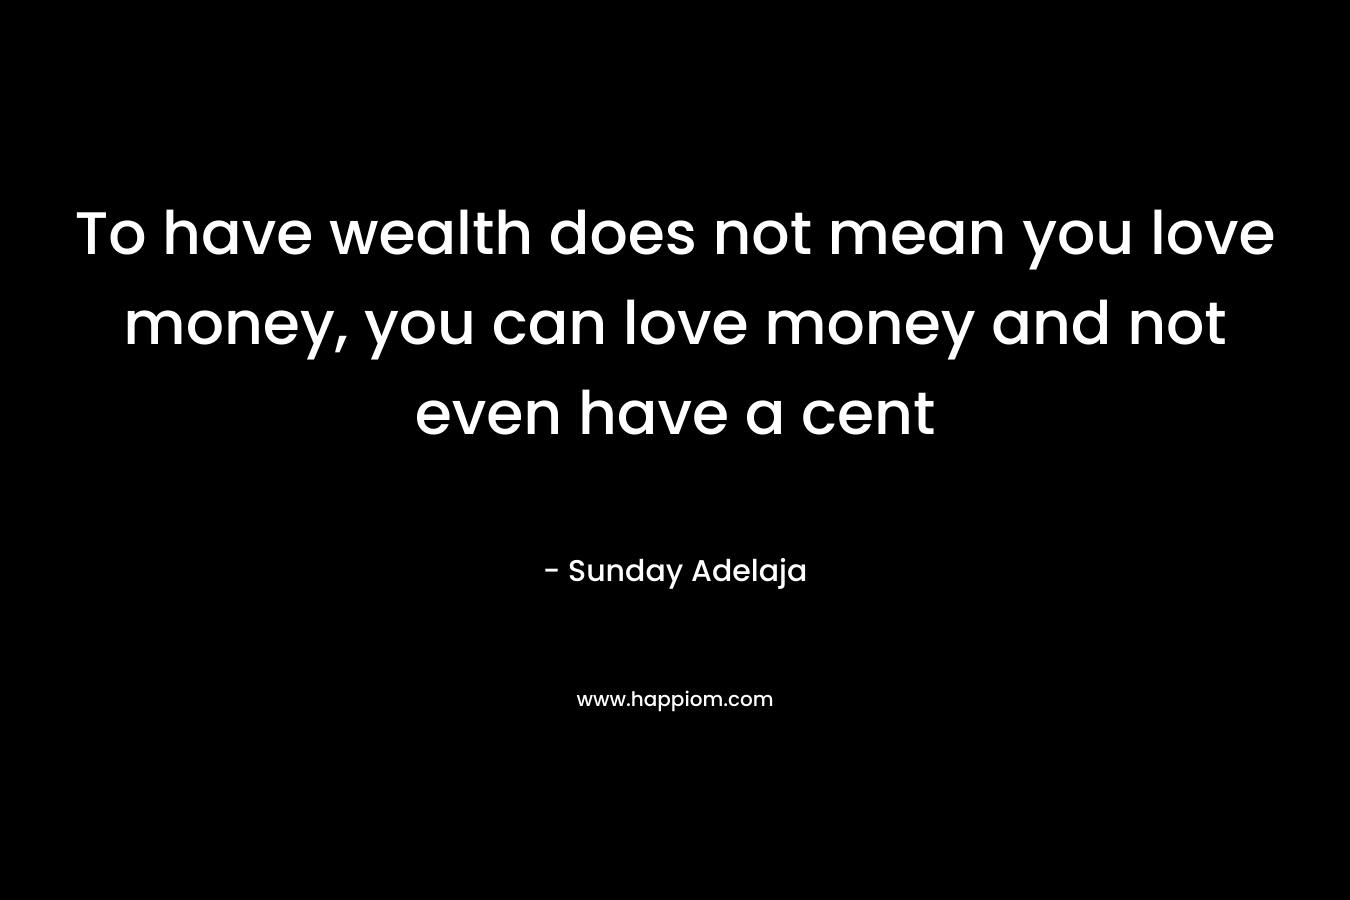 To have wealth does not mean you love money, you can love money and not even have a cent